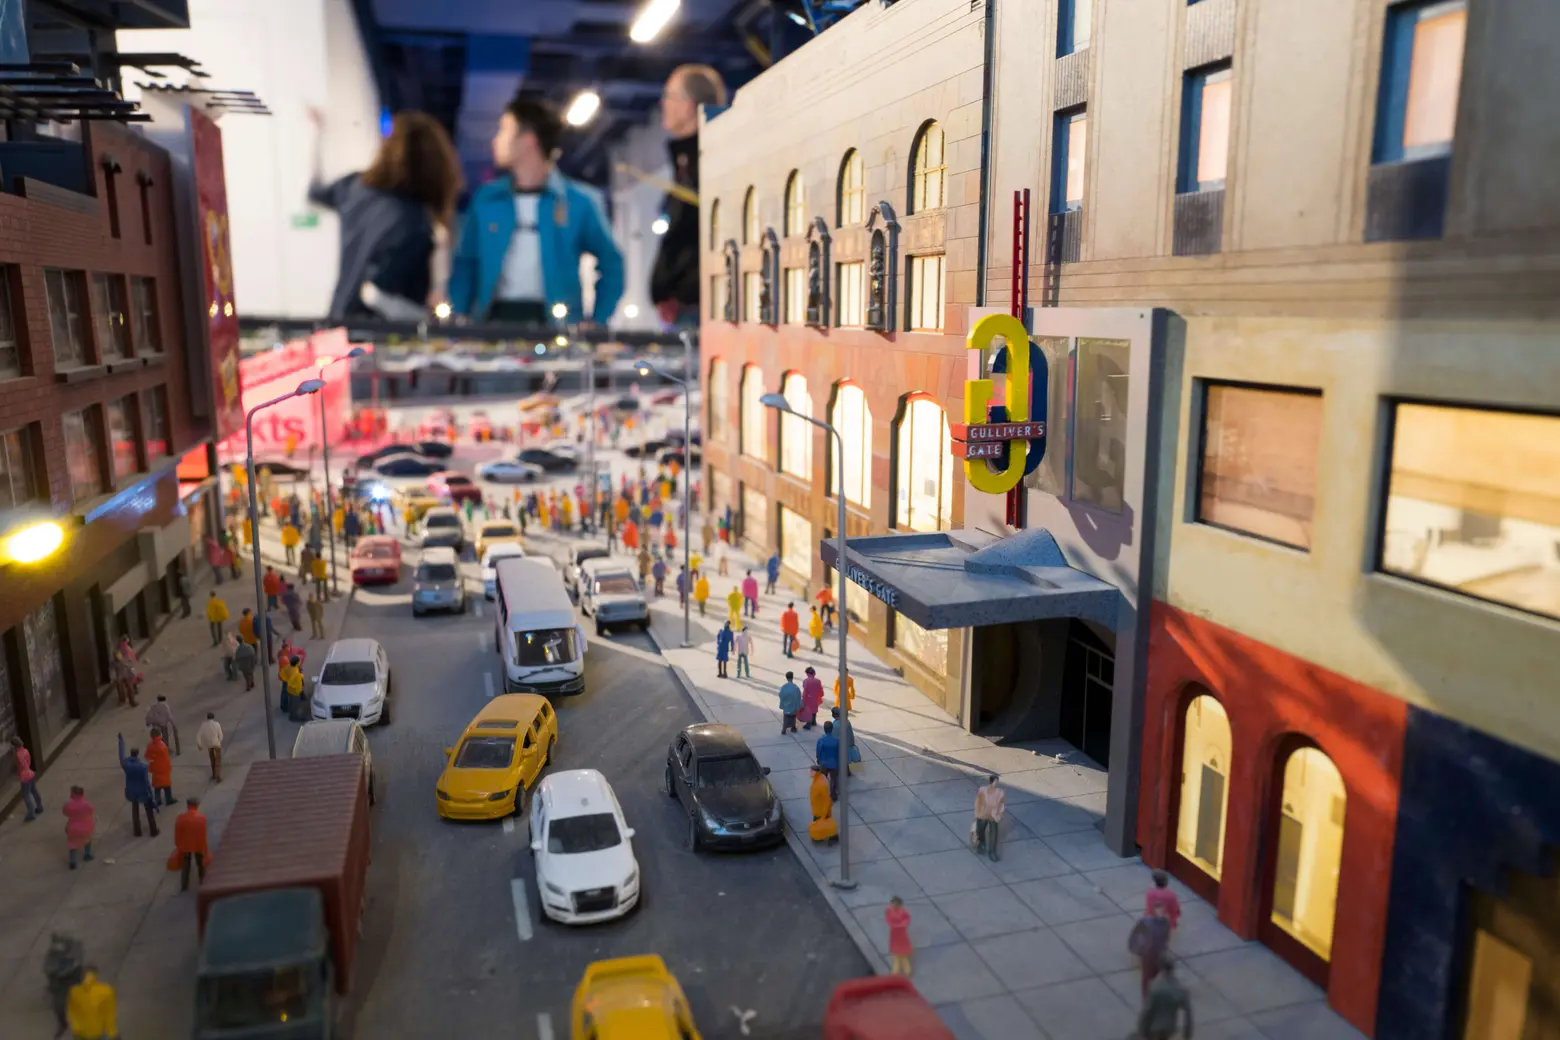 Go on a holiday scavenger hunt in a miniature version of NYC